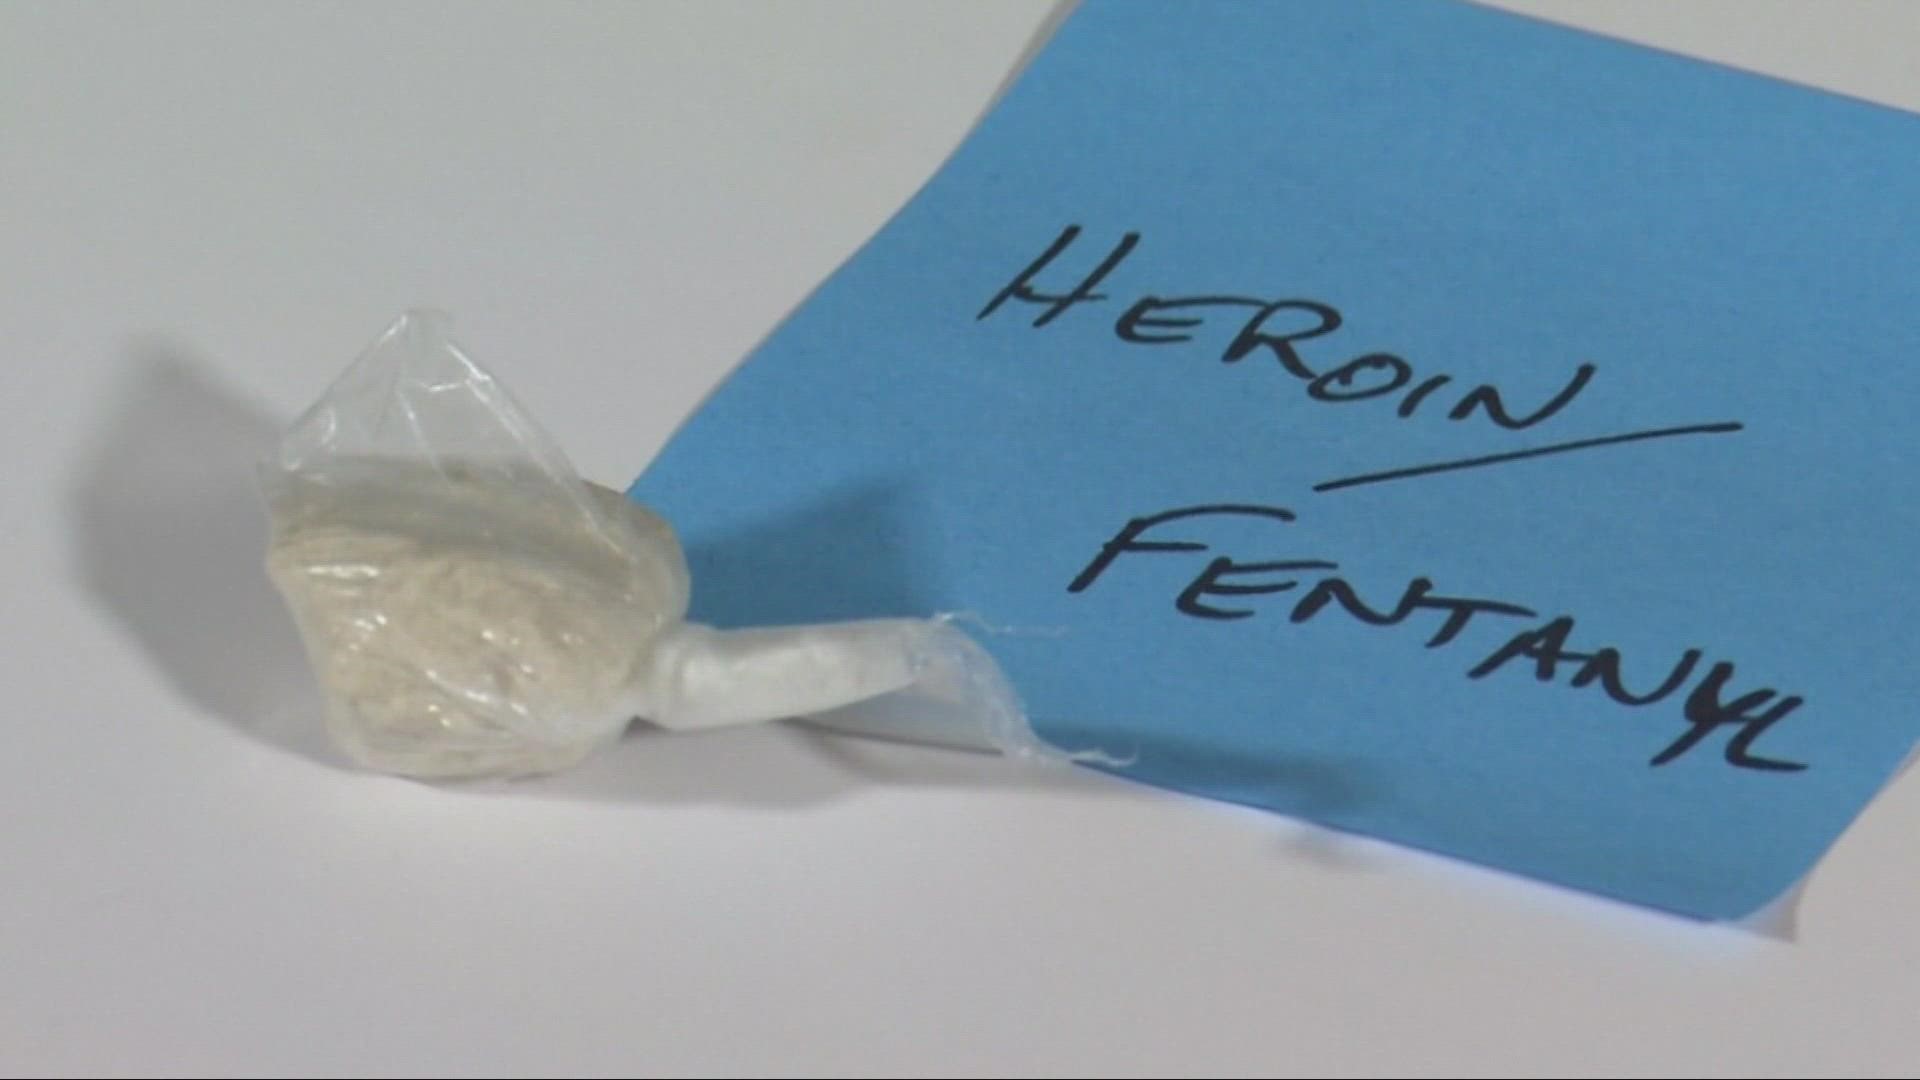 So far this year in Cuyahoga County, 629 people have died from drug overdoses, 464 of those involved heroin, fentanyl and cocaine.